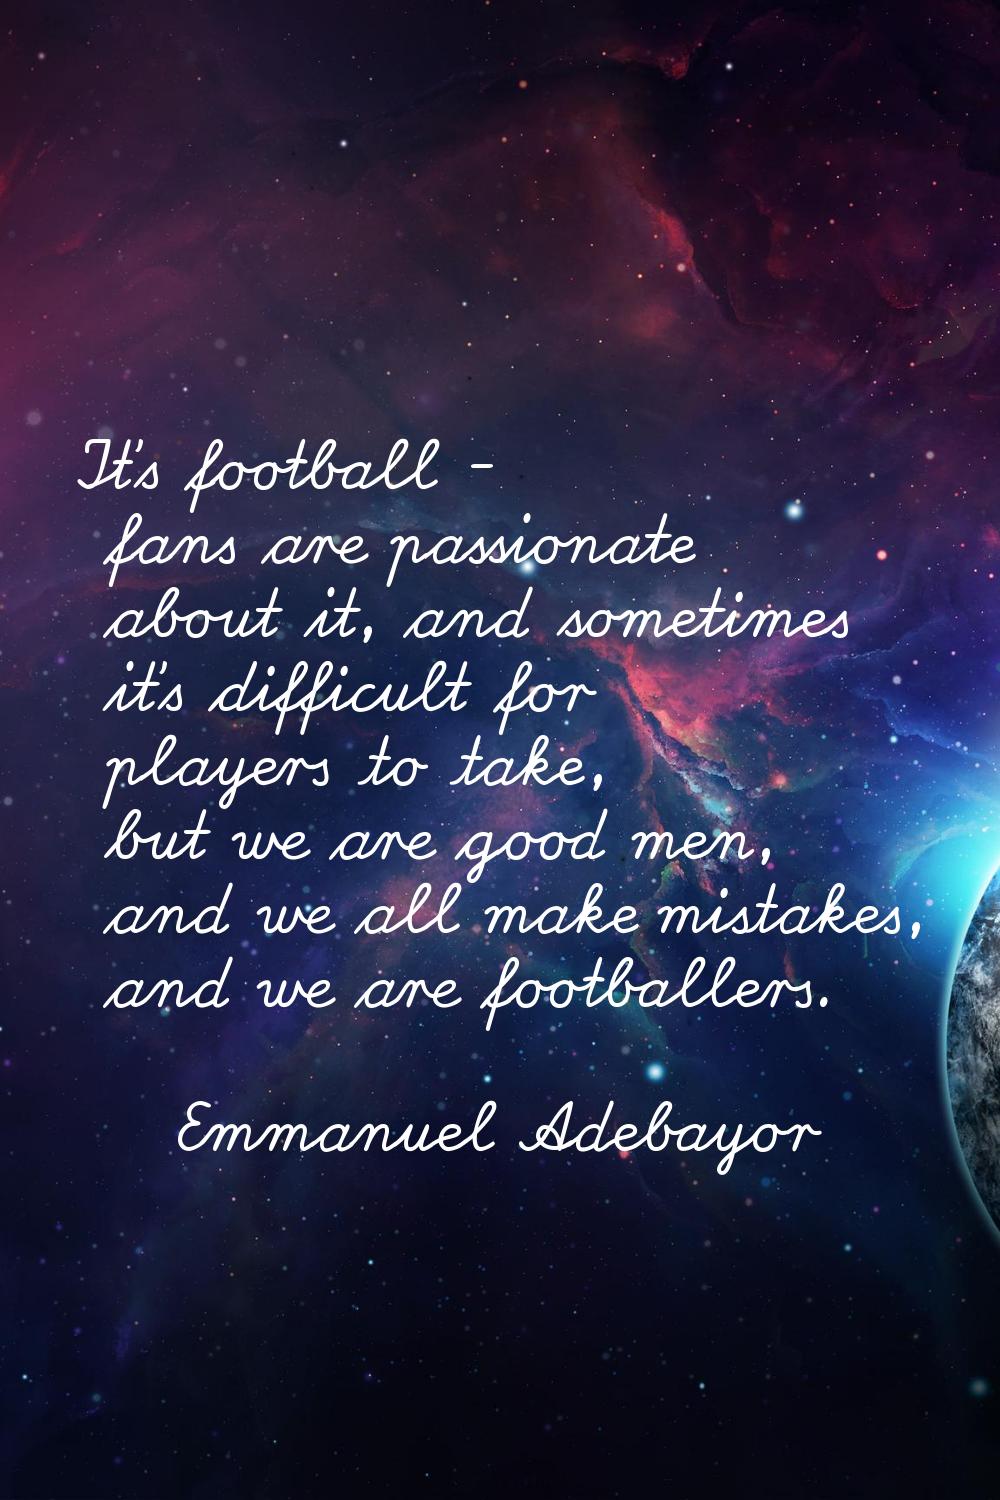 It's football - fans are passionate about it, and sometimes it's difficult for players to take, but